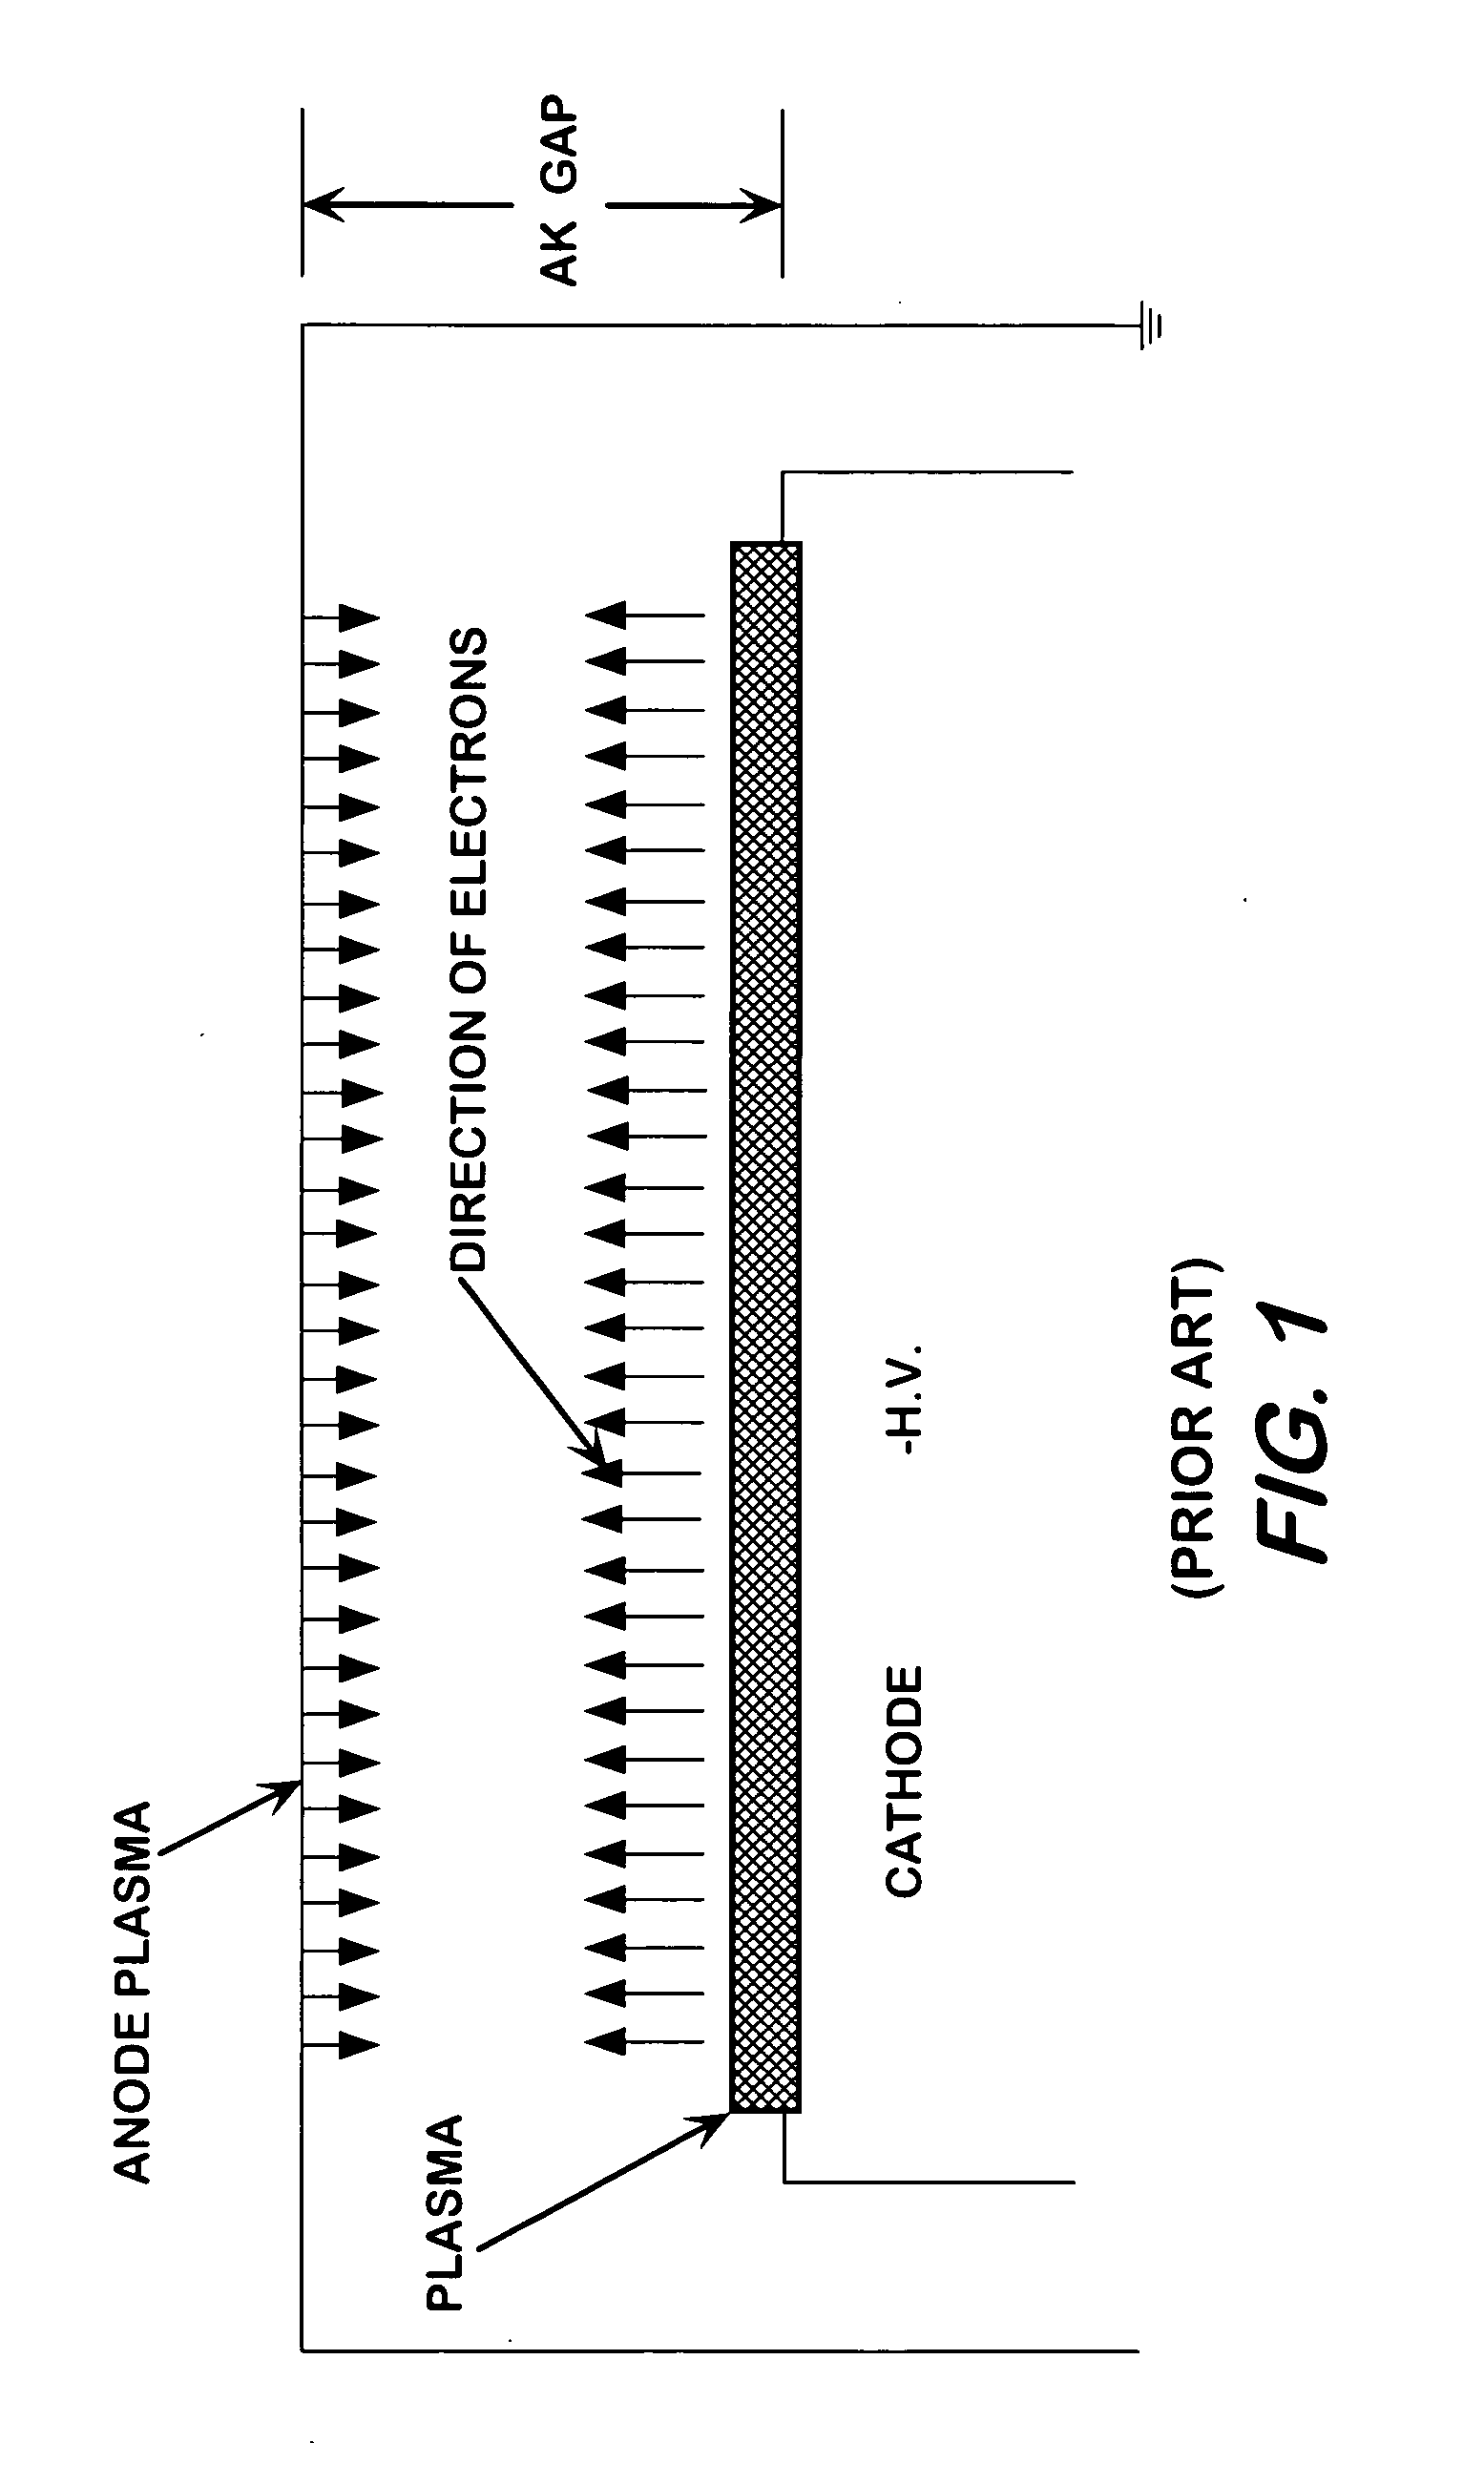 High power diode utilizing secondary emission